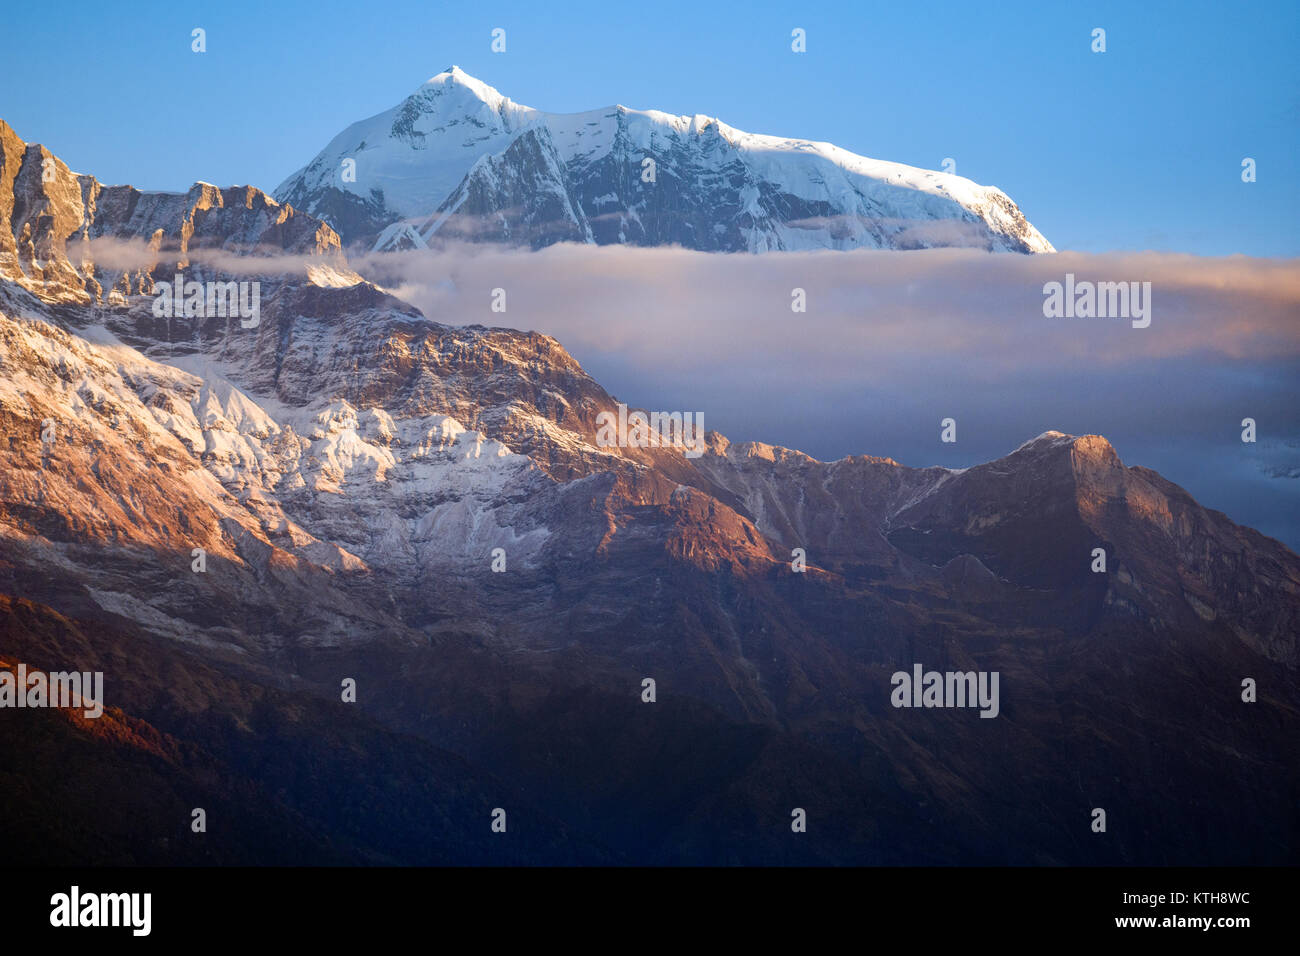 Edge of the Annapurna mountain range rises above the clouds and behind the slope of Fishtail mountain. Stock Photo